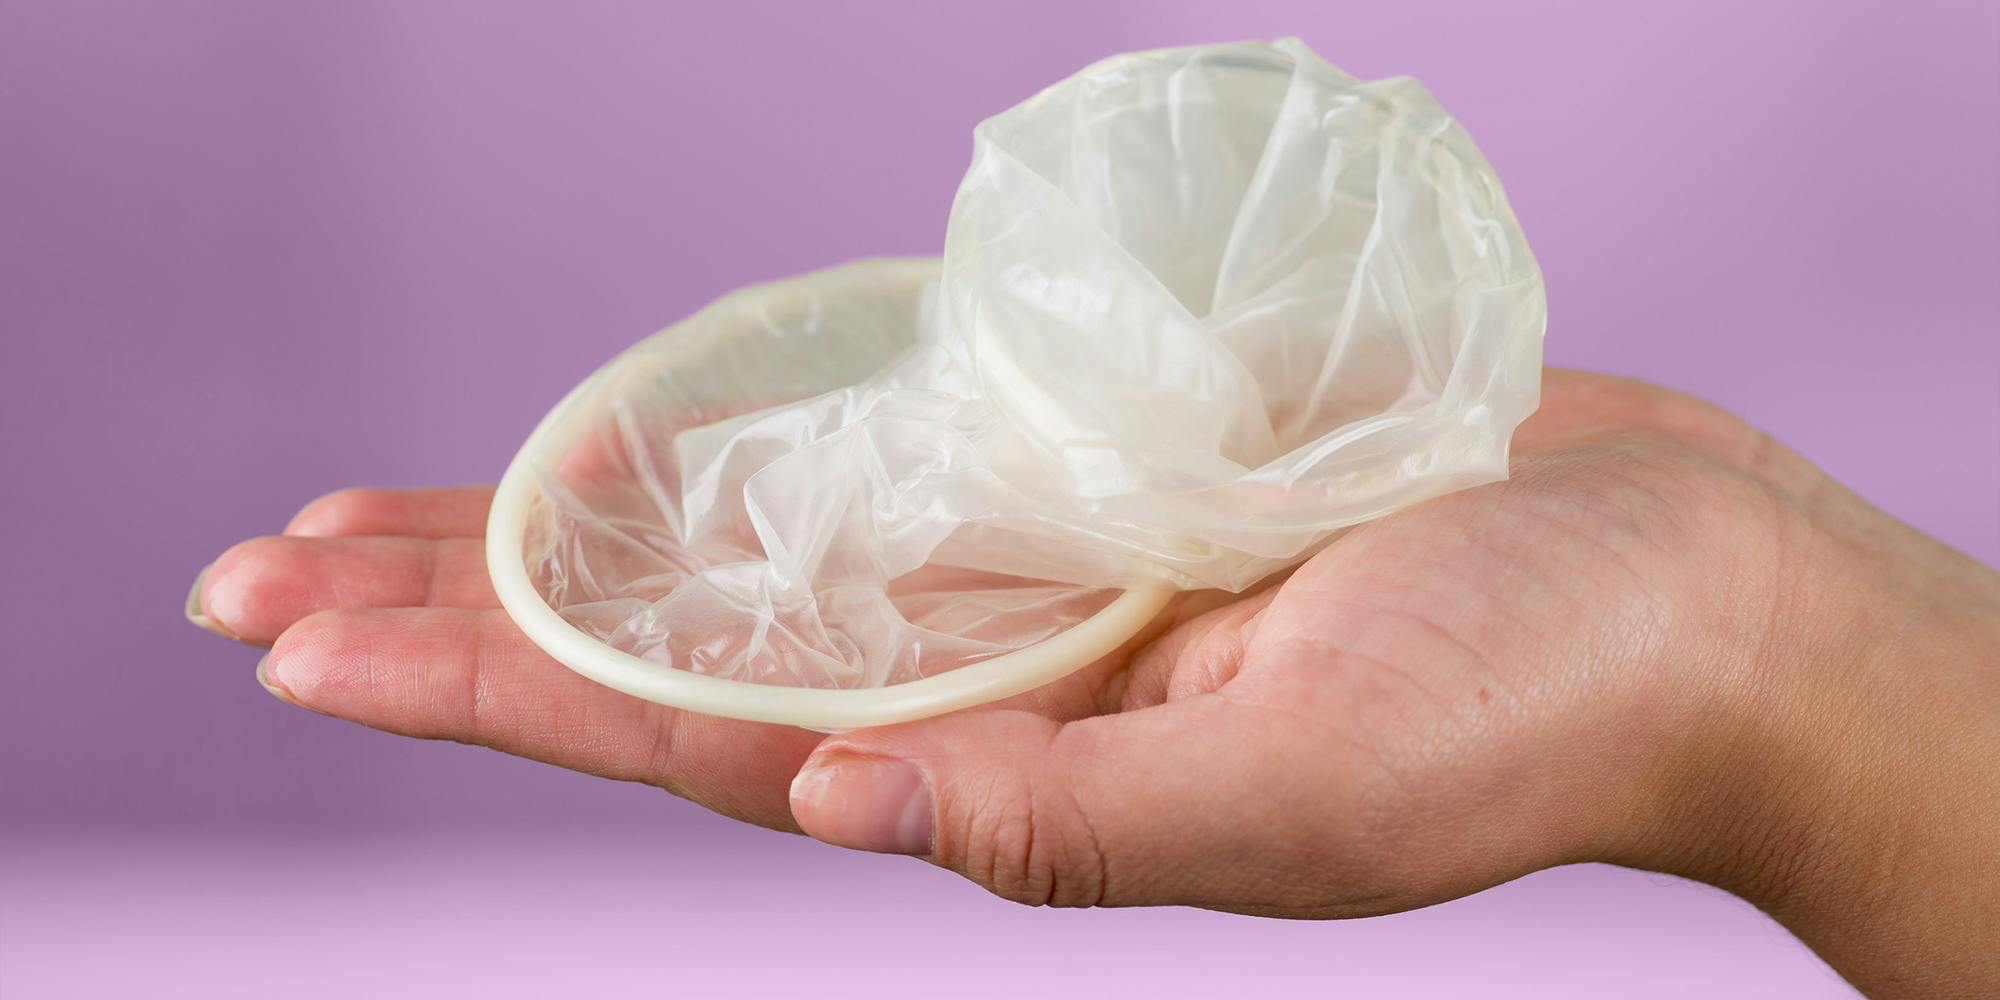 How To Use An Internal (Formerly Female) Condom